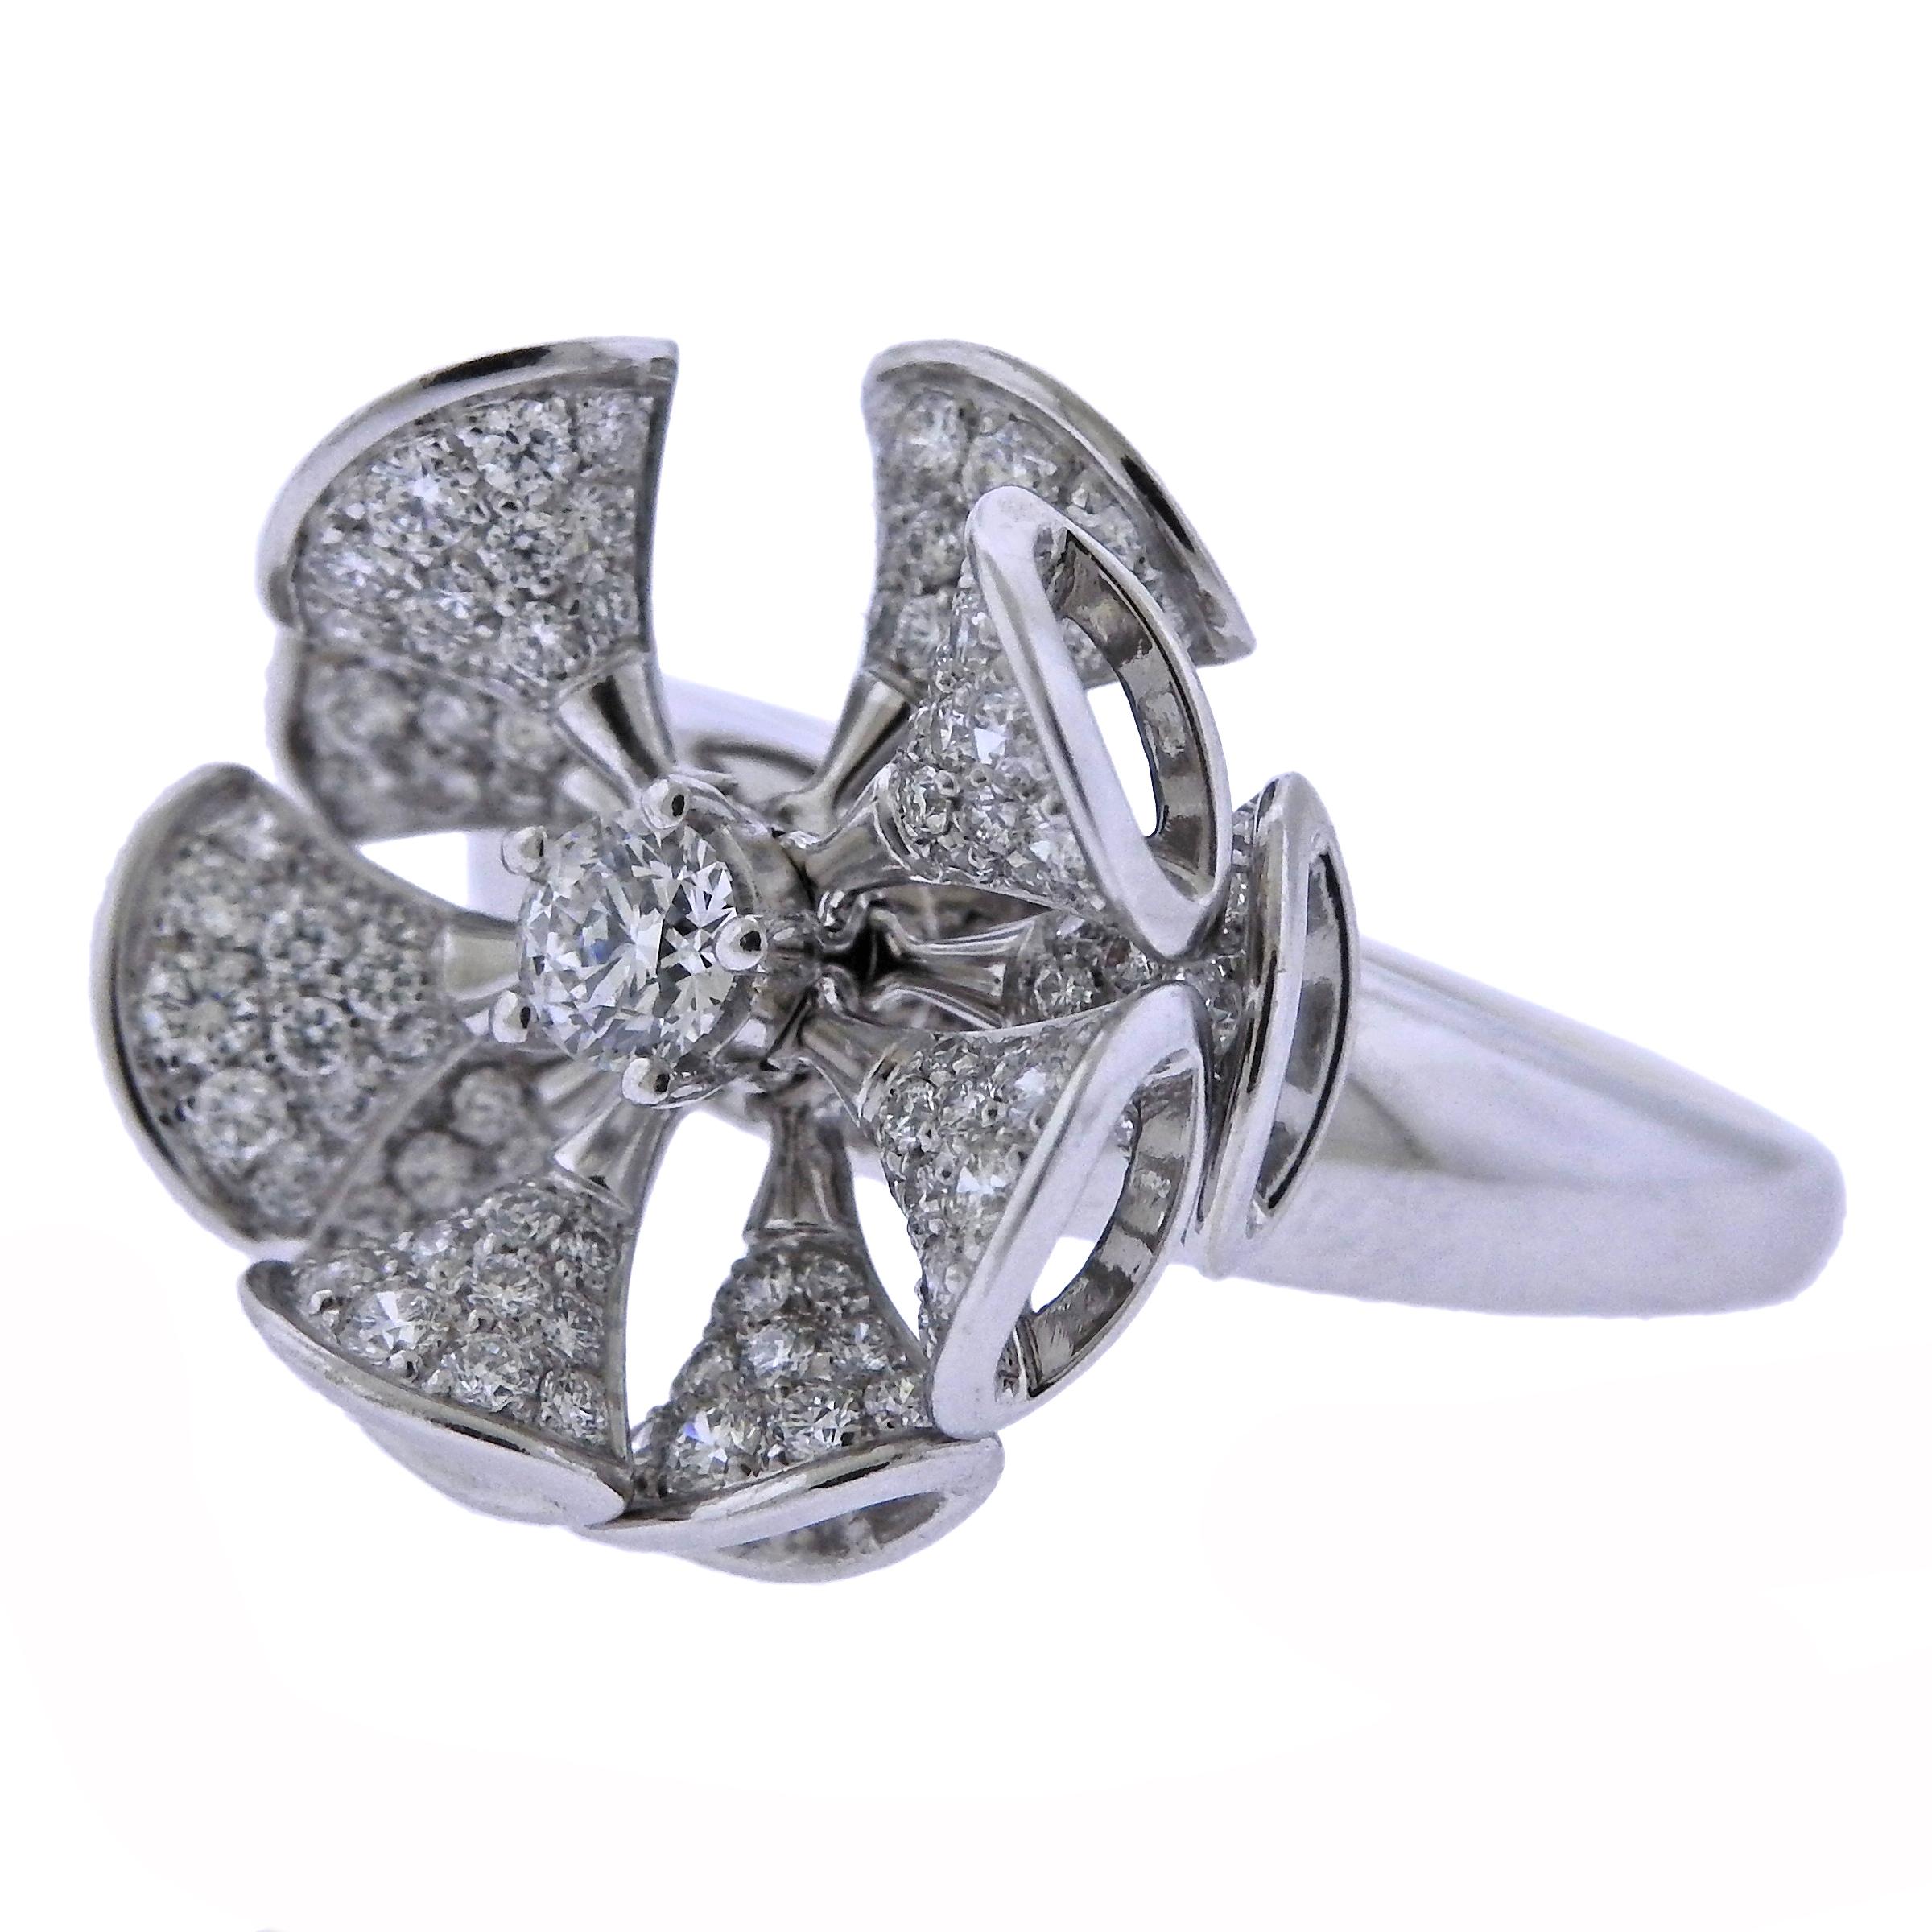 18k white gold ring, crafted by Bulgari for Diva's Dream collection, adorned with approx. 1.00ctw in G/VS diamonds. Current retail $12000. Bvlgari ref. AN857079. Ring size - 6, ring top - 18mm in diameter., weighs 9.9 grams. Marked: Bvlgari, made in